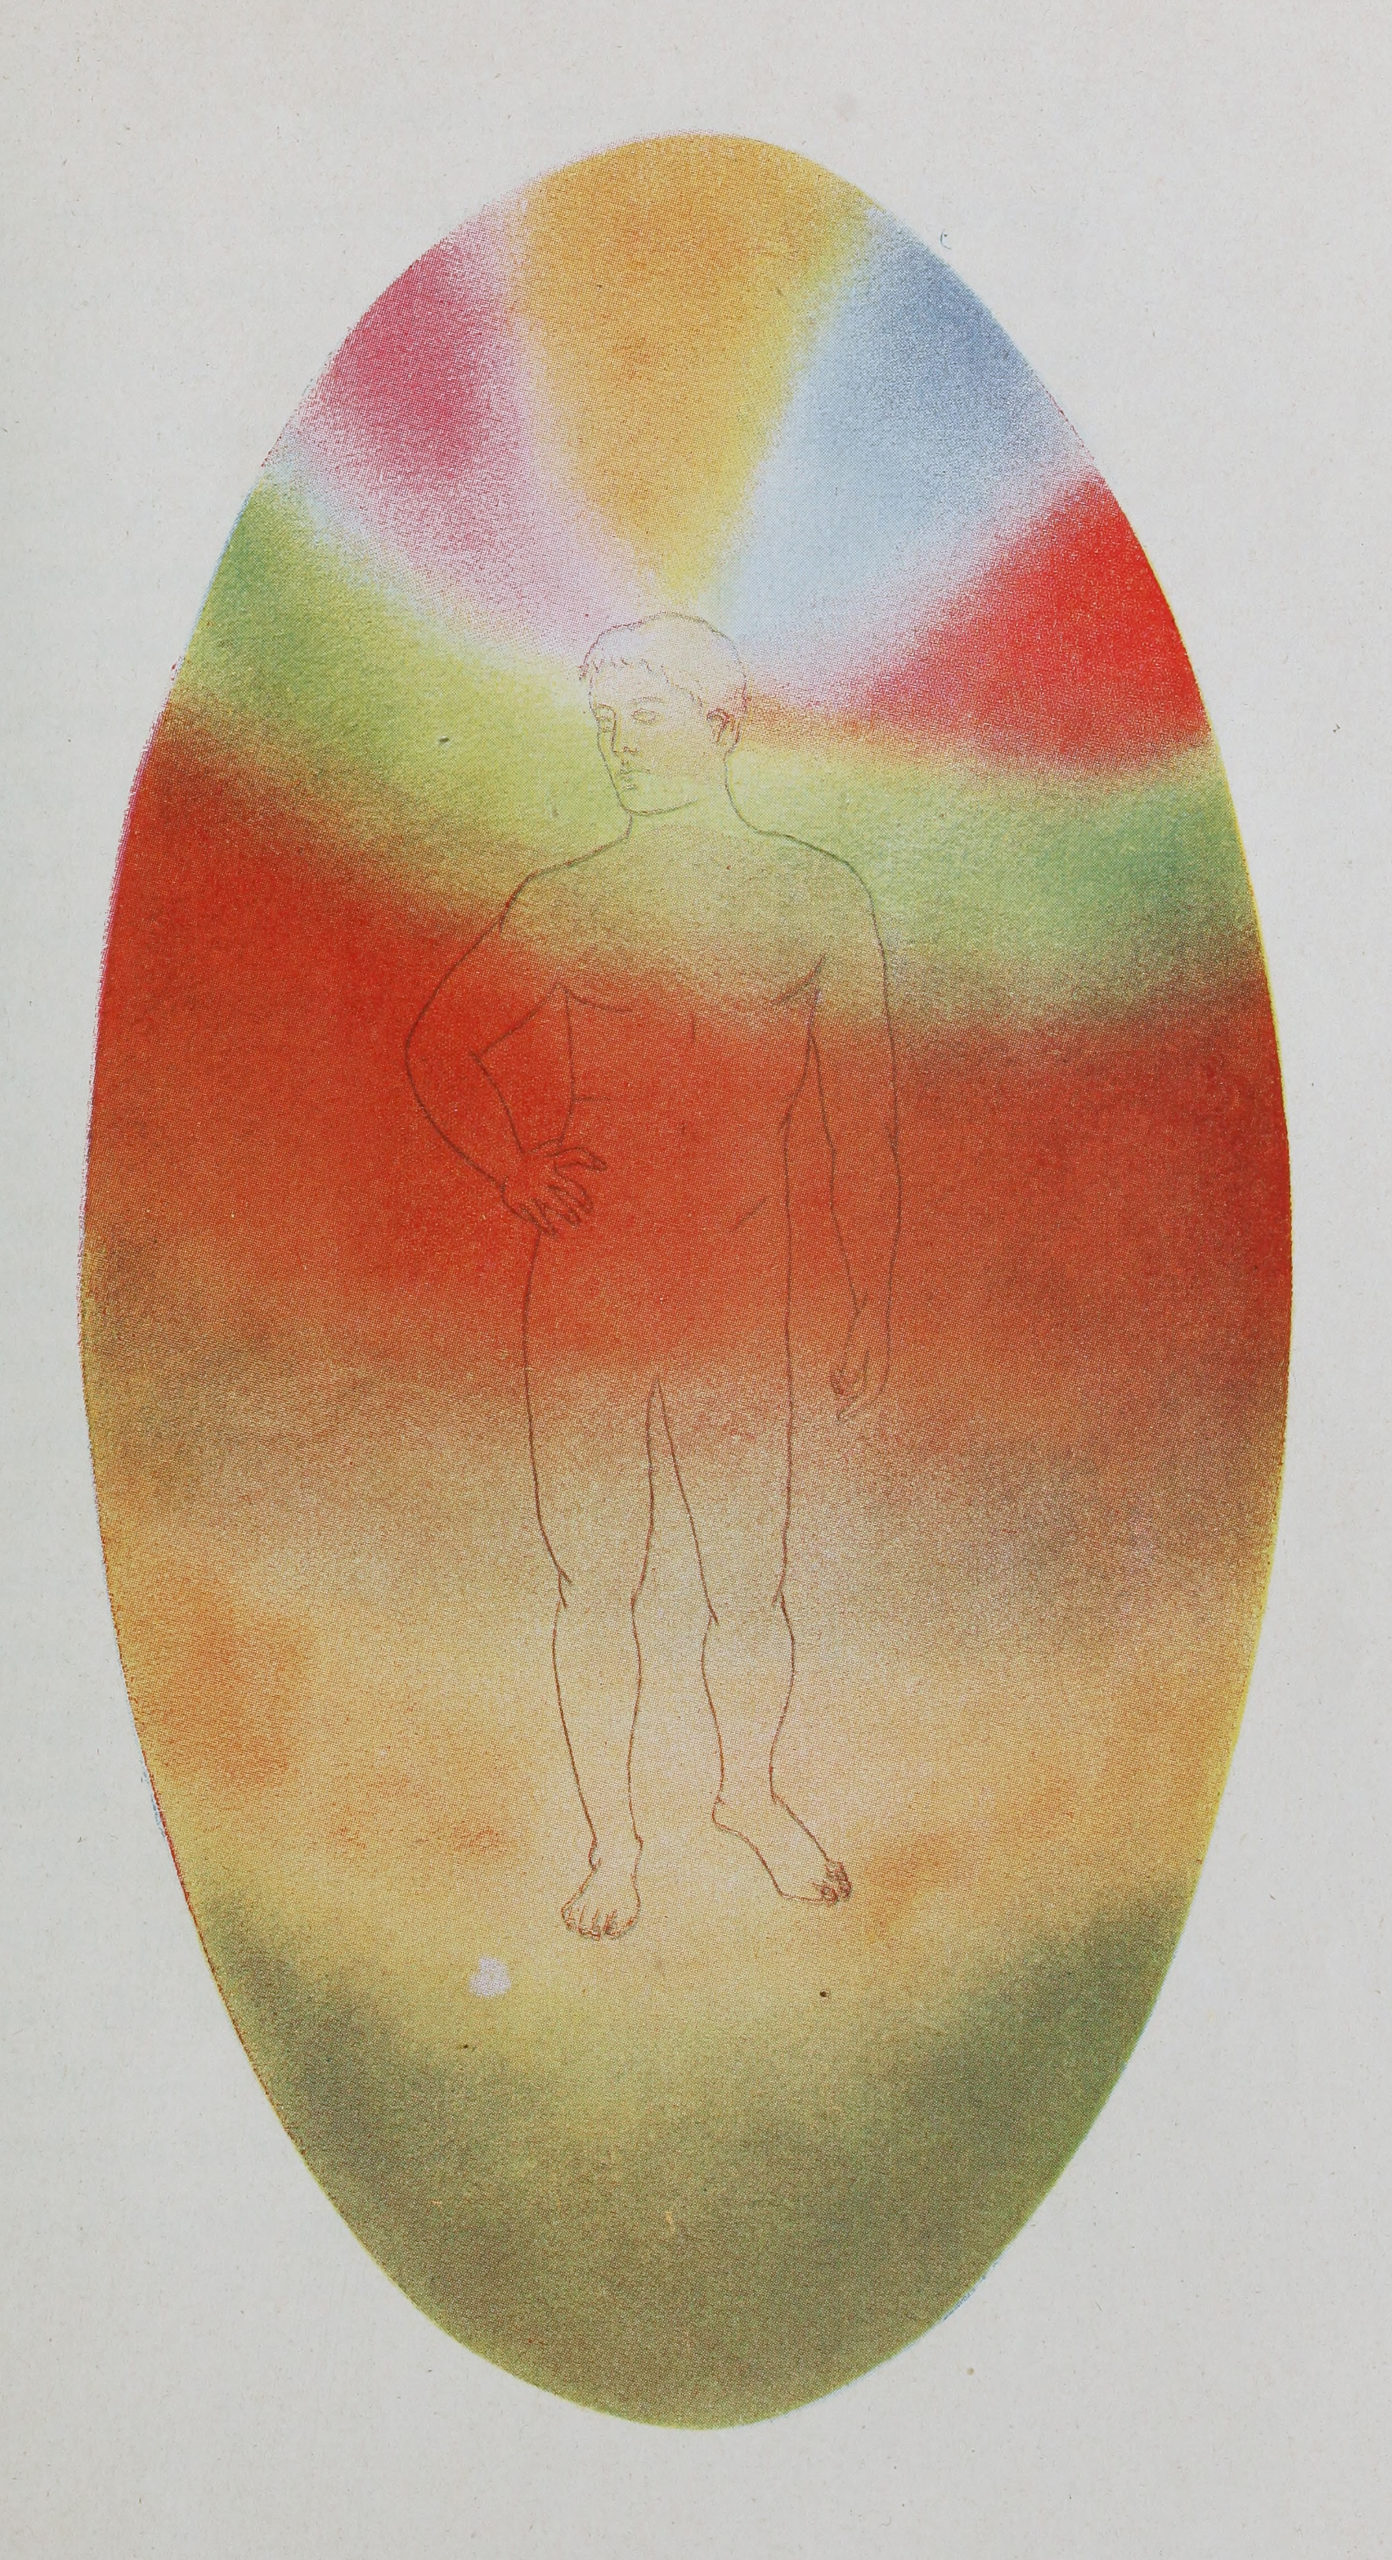 Annie Besant and C. W. Leadbeater, Man Visible and Invisible (New York, 1903), plate X, ’The astral body of the average man’